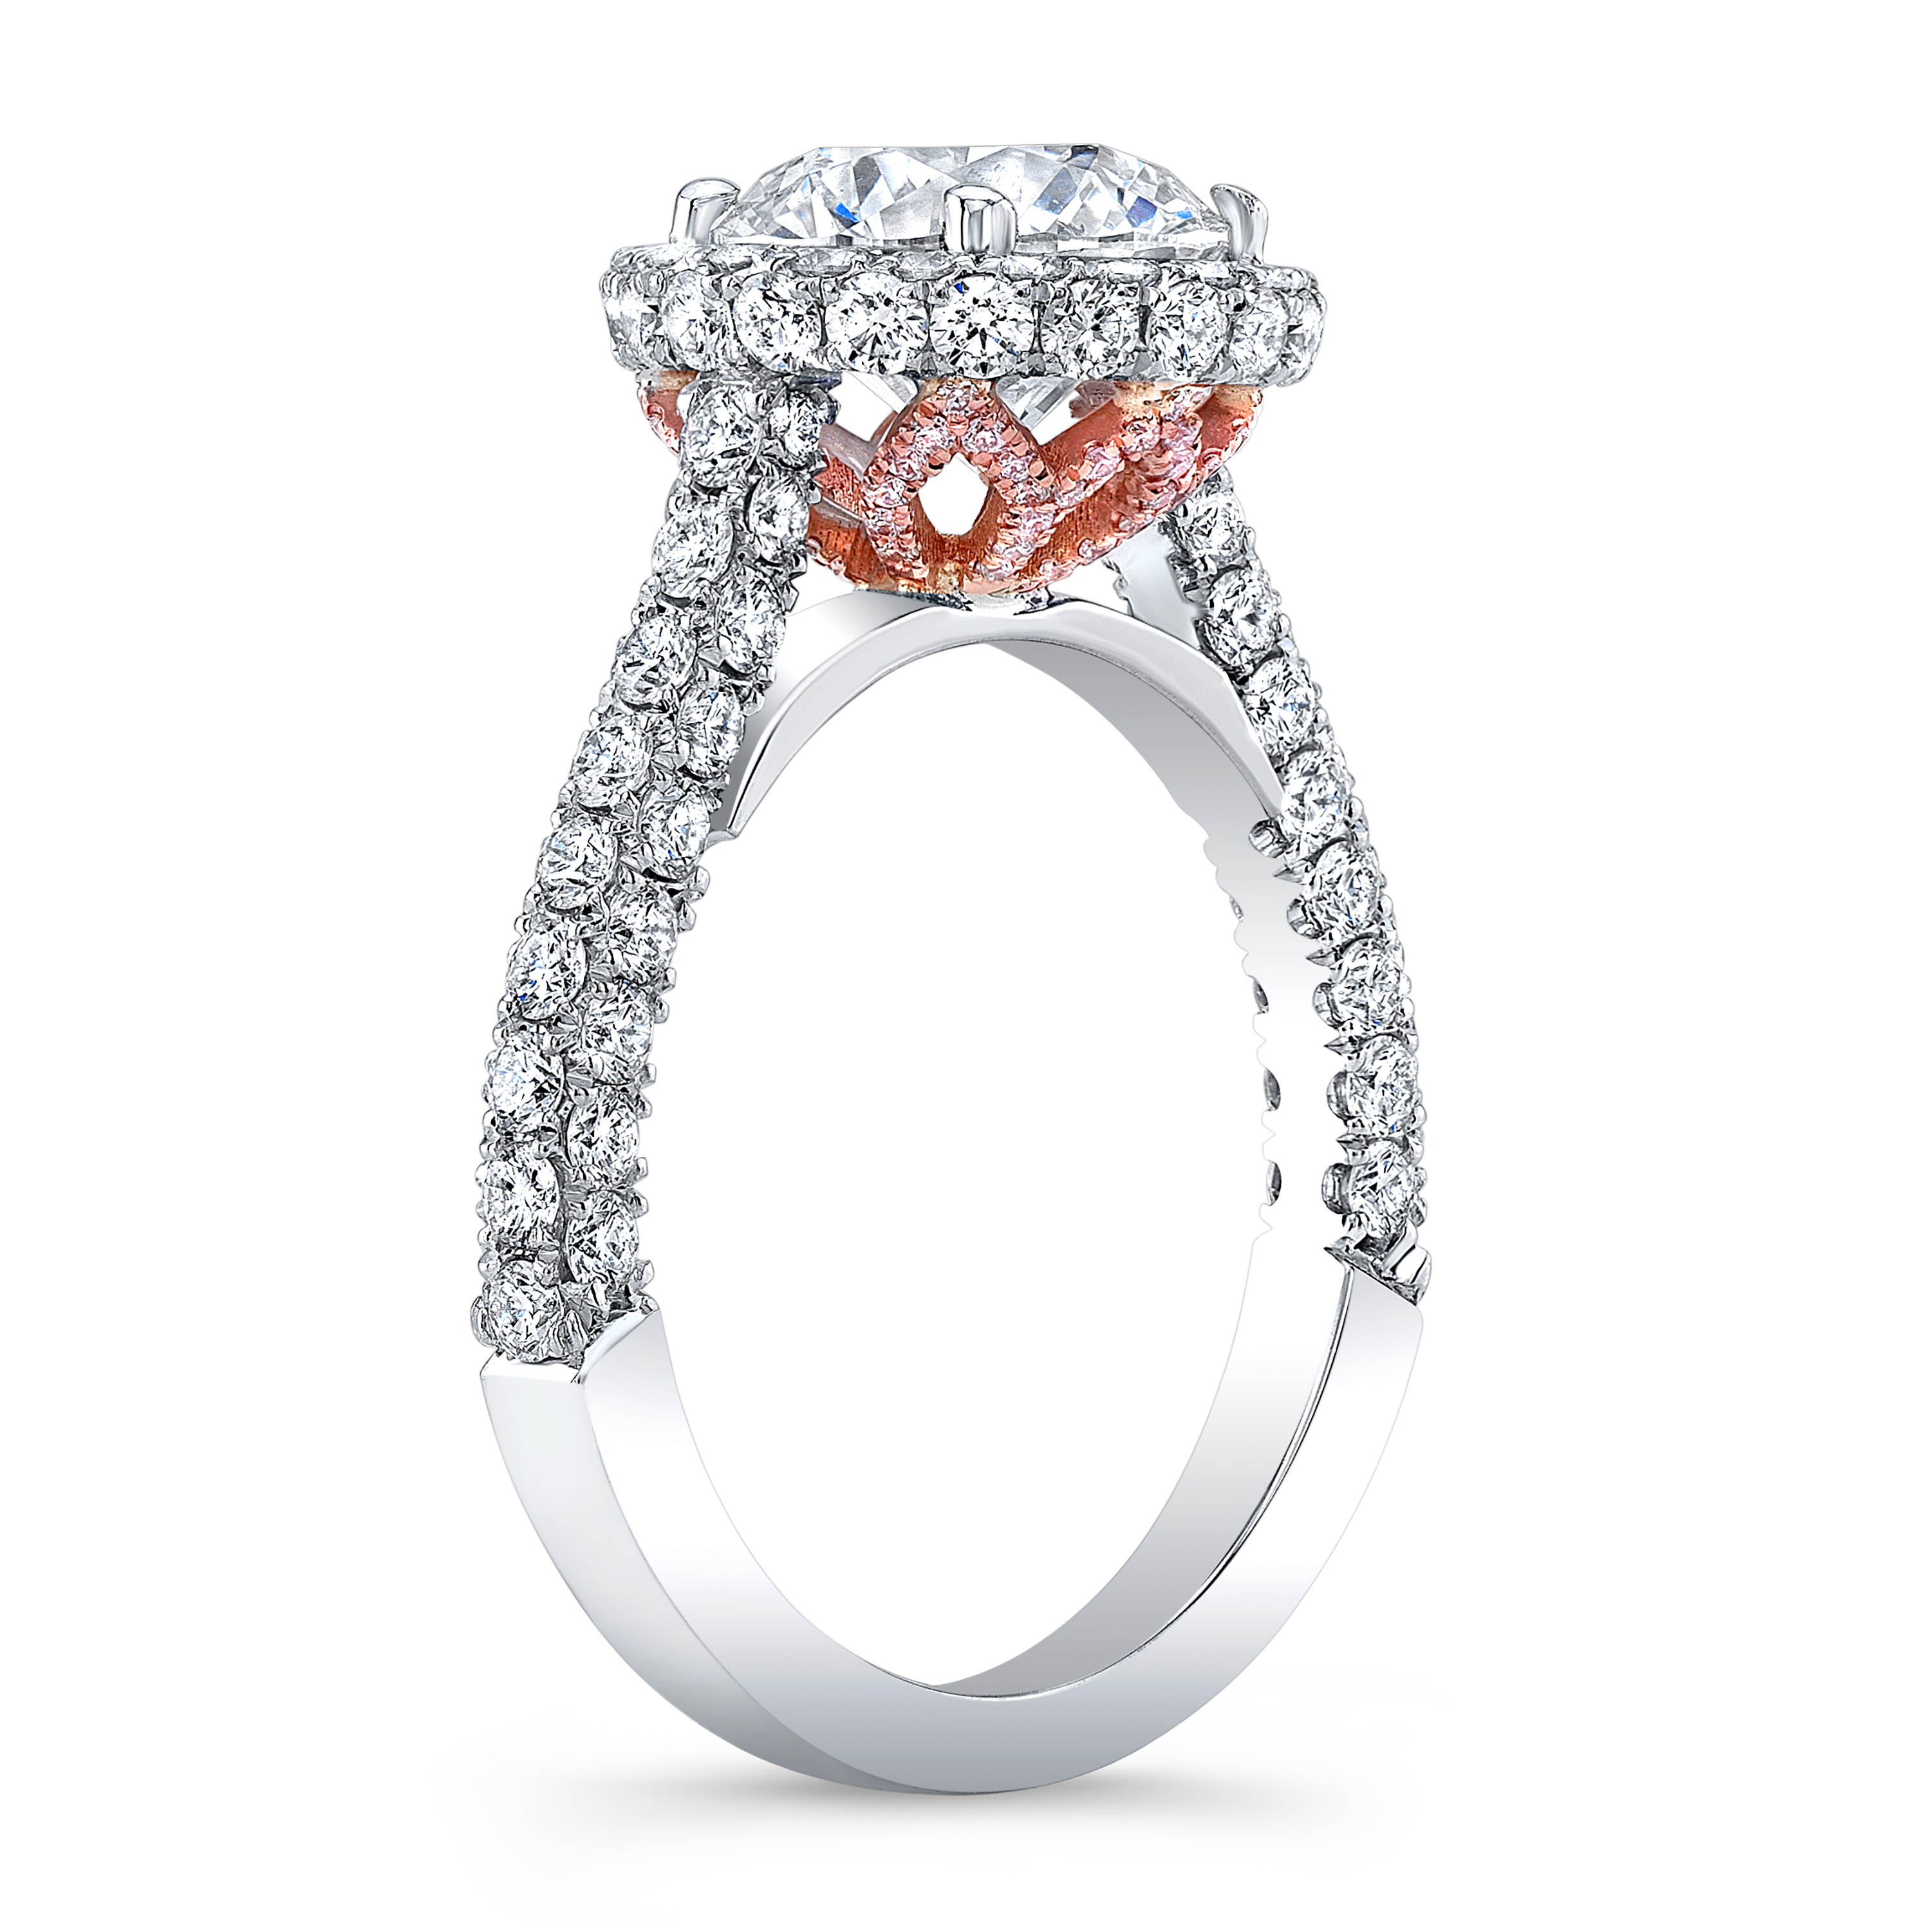 Can a pink diamond be used for an engagement ring? - Quora